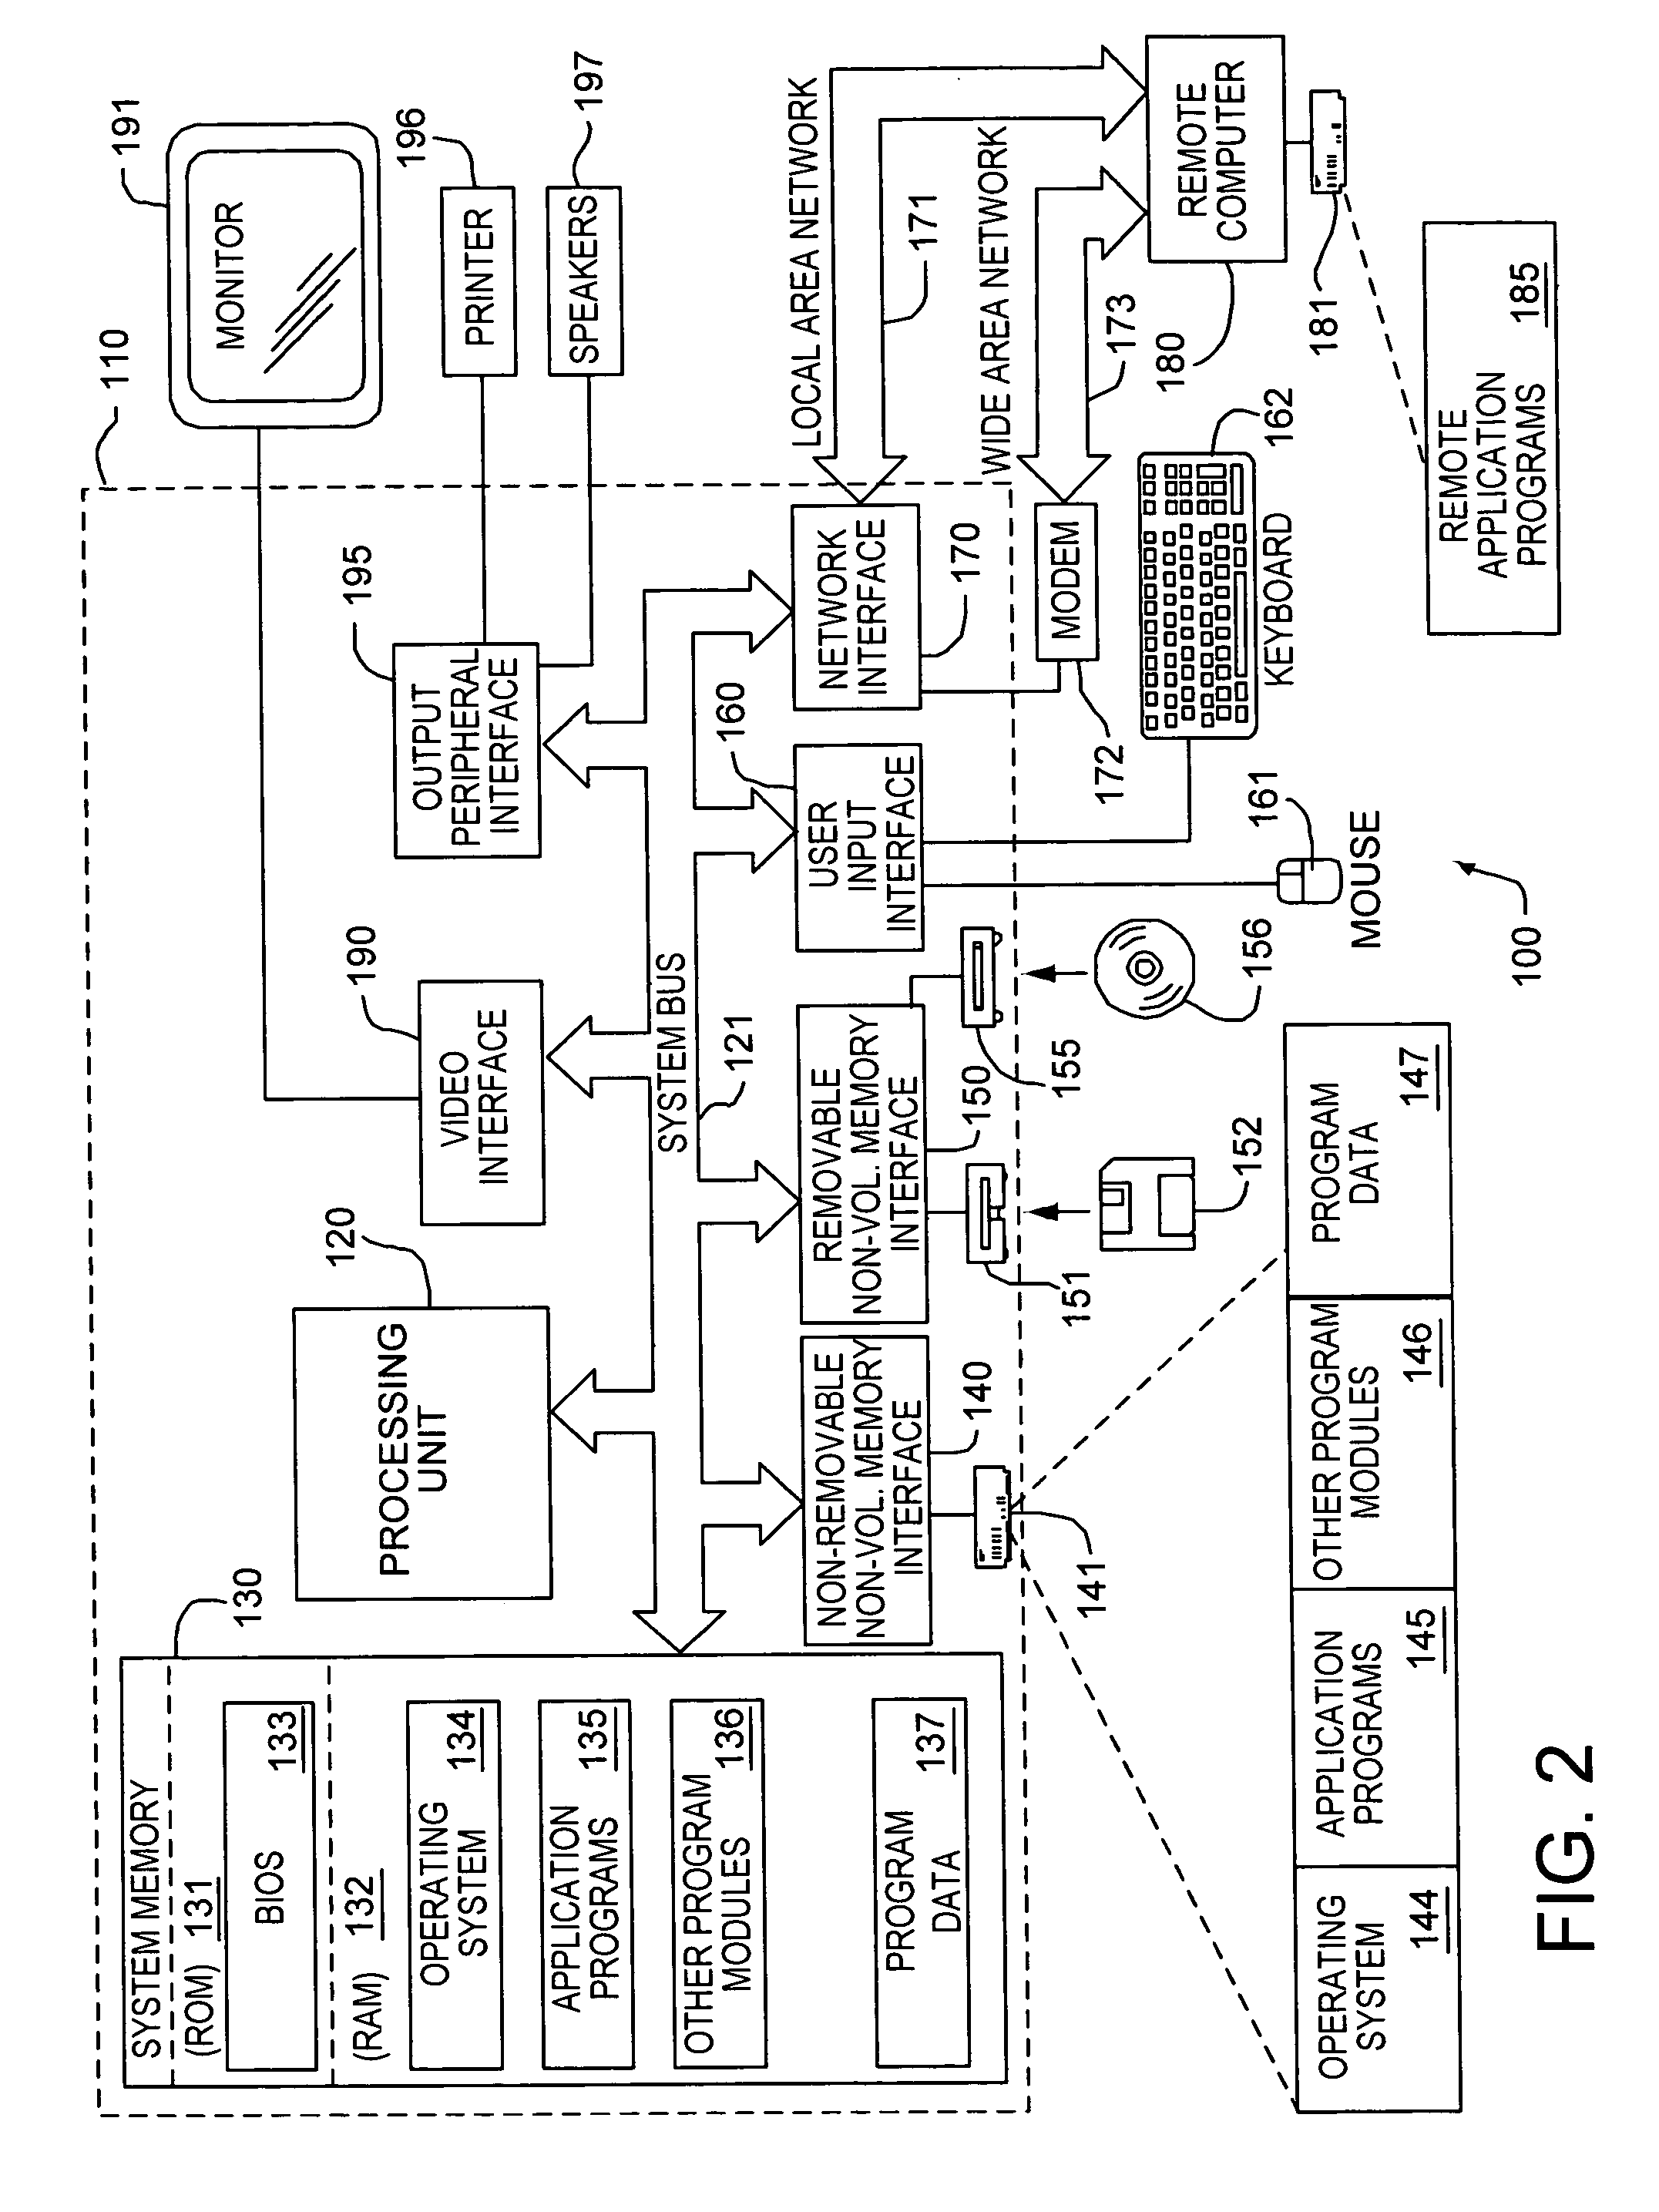 System and method for color selection